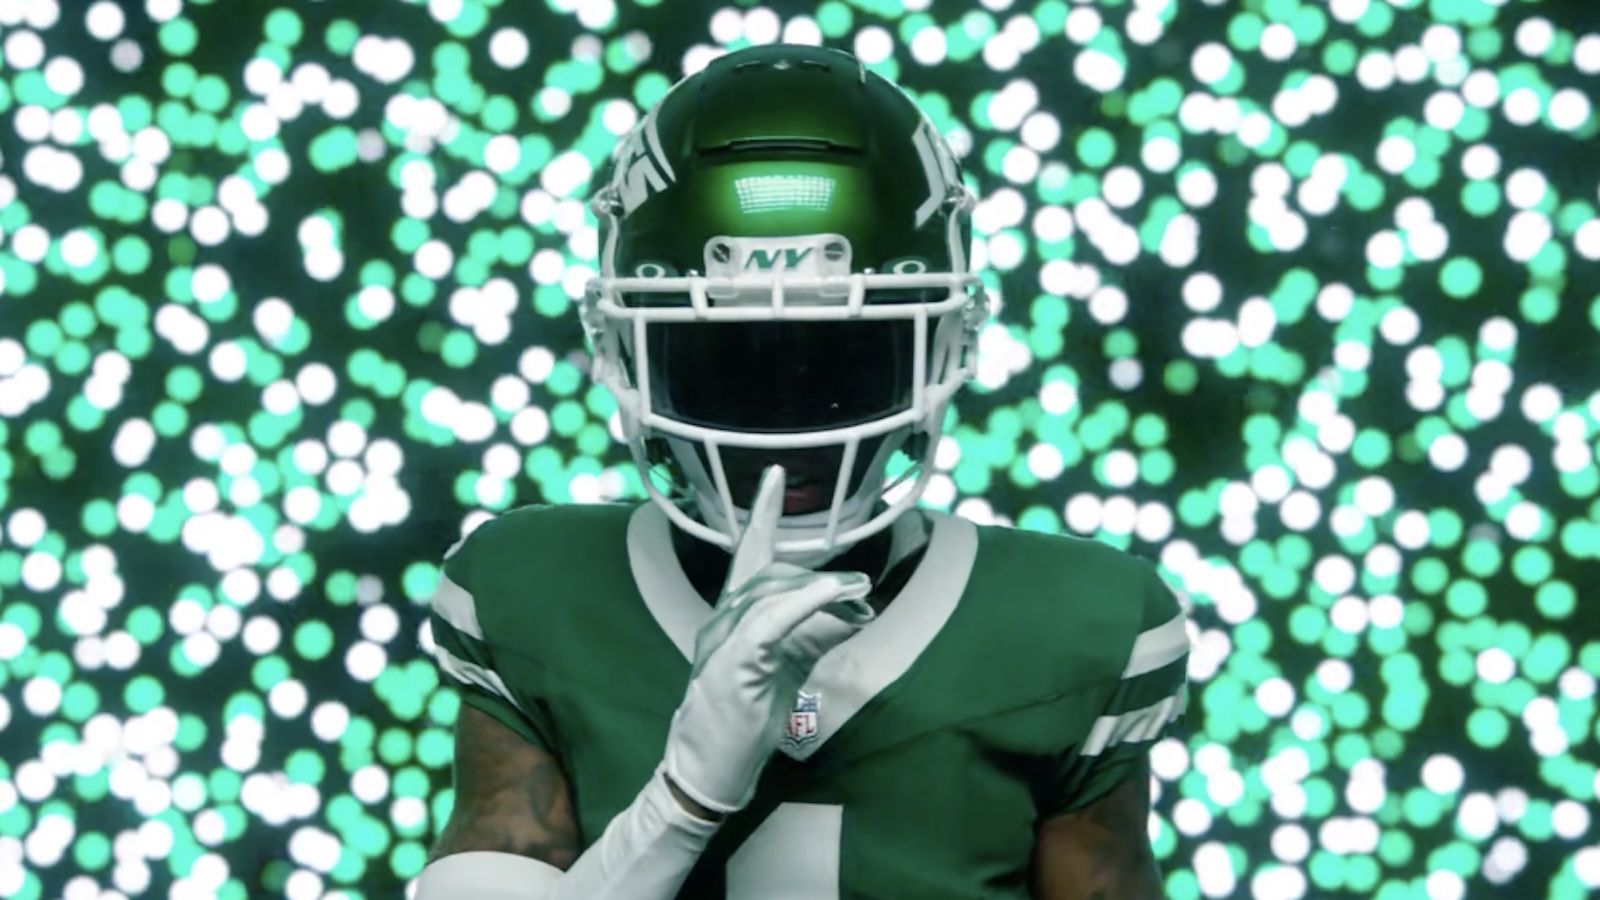 Most fans had same reaction to Jets' new uniforms